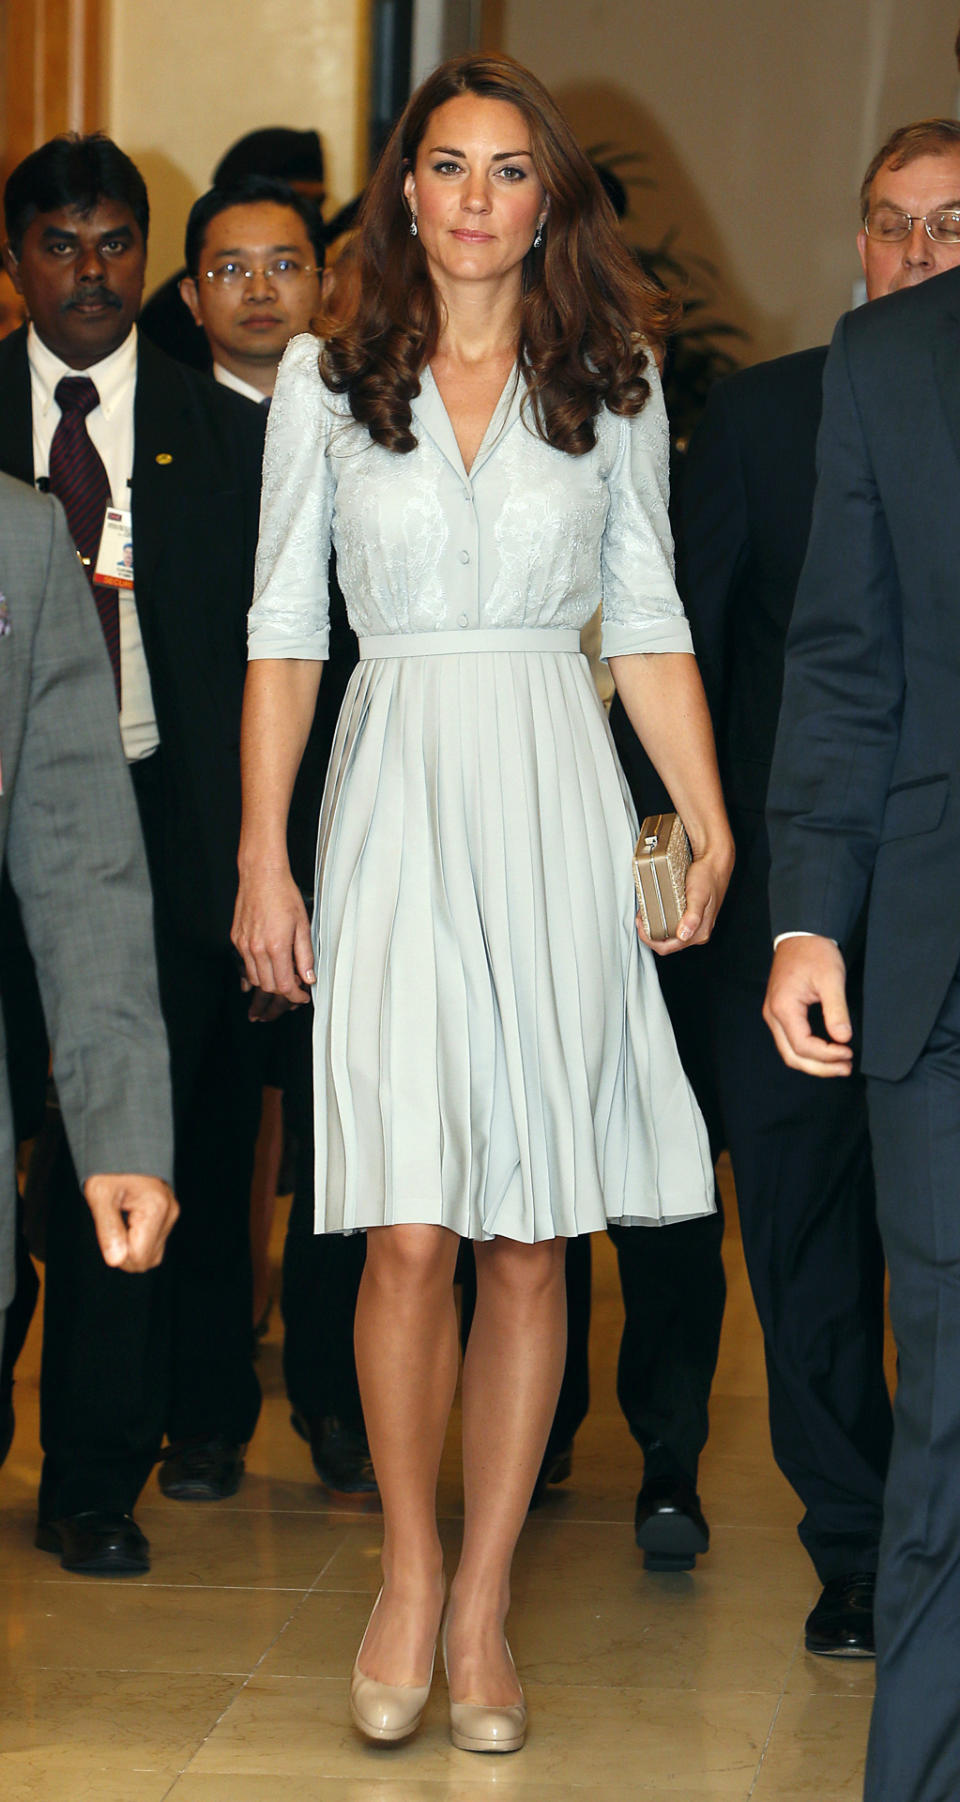 <p>For her arrival in Kuala Lumpur, Kate donned a duck egg blue dress by Jenny Packham along with nude L.K. Bennett pumps.</p><p><i>[Photo: PA]</i></p>